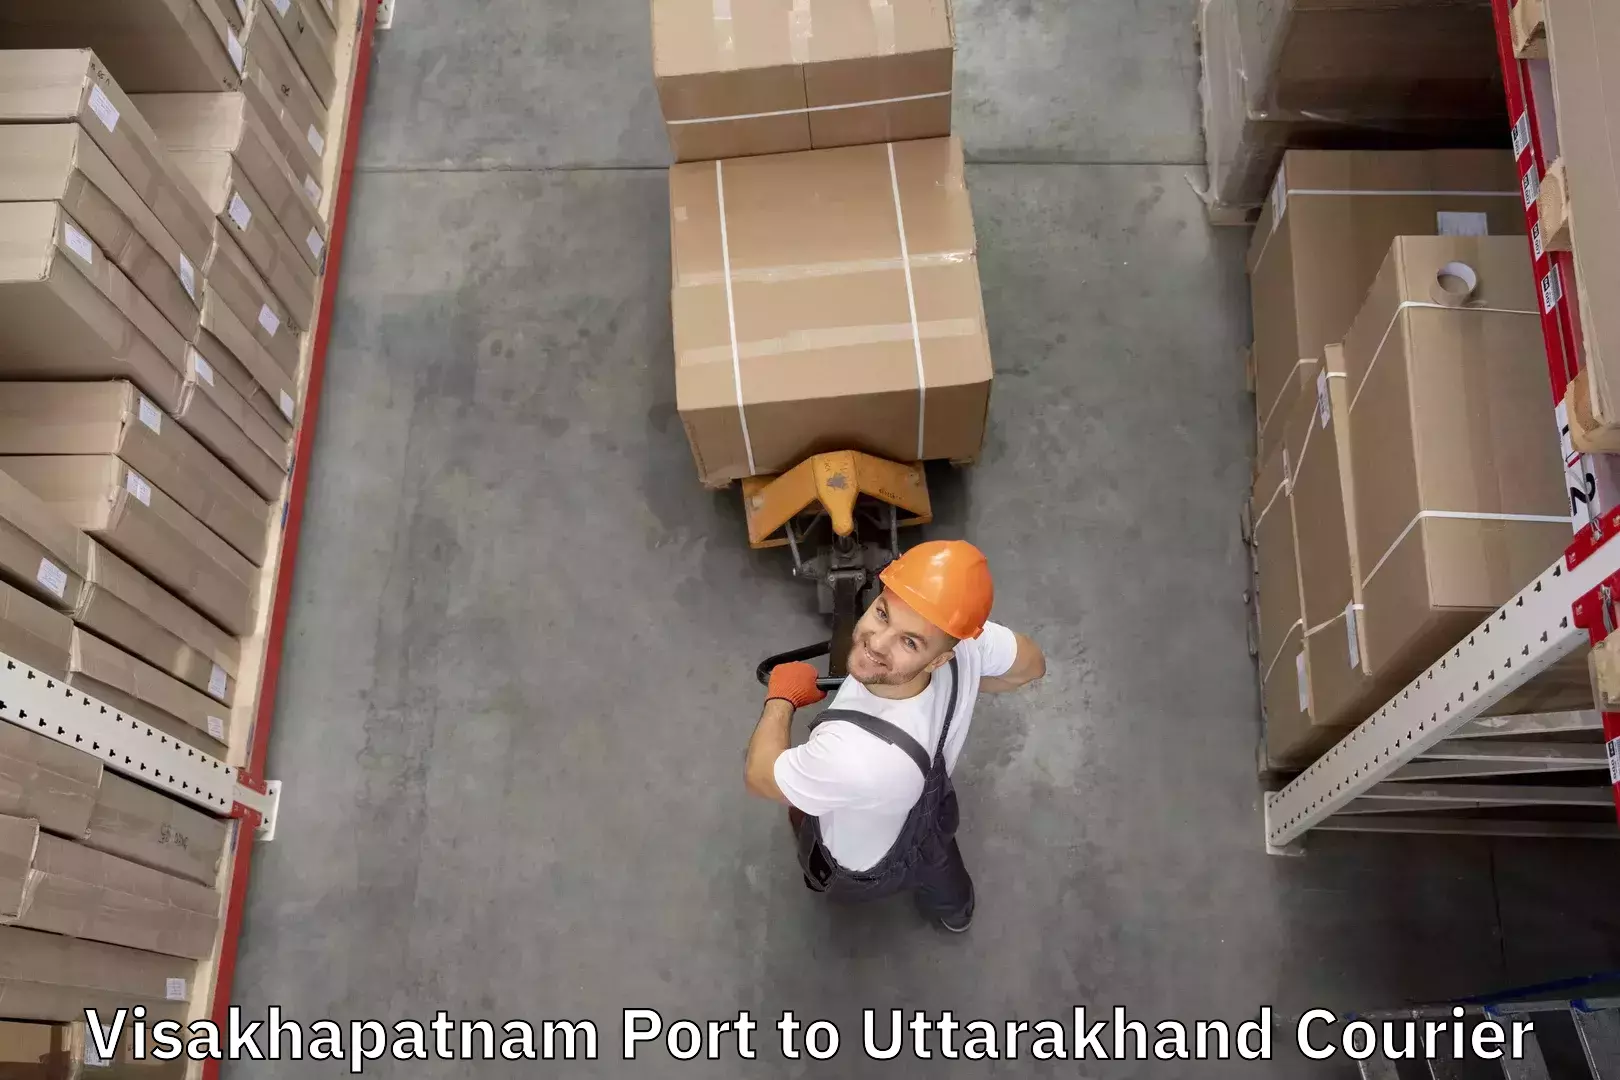 Luggage delivery network Visakhapatnam Port to Lohaghat